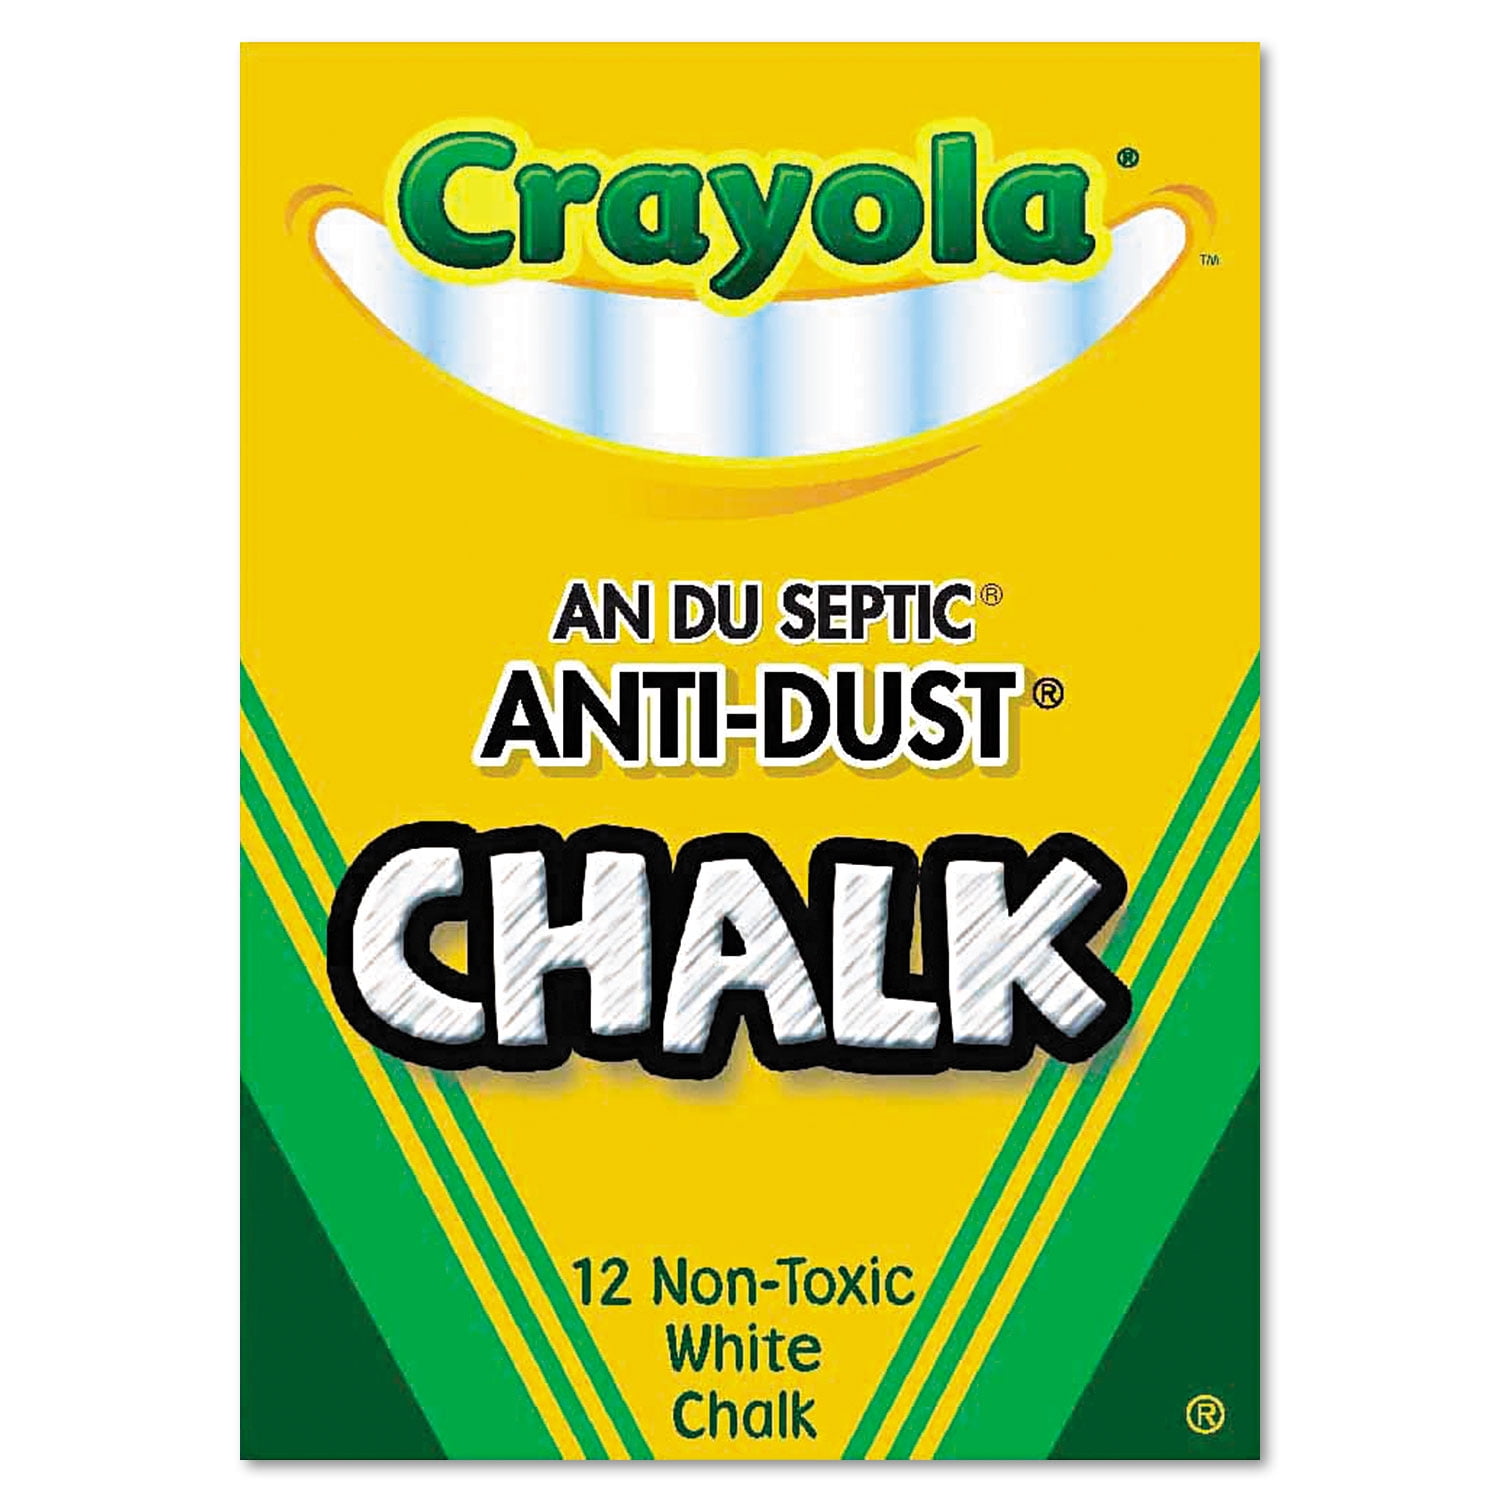 Water Soluble Dust free Chalk Colored White Chalk Dustless - Temu